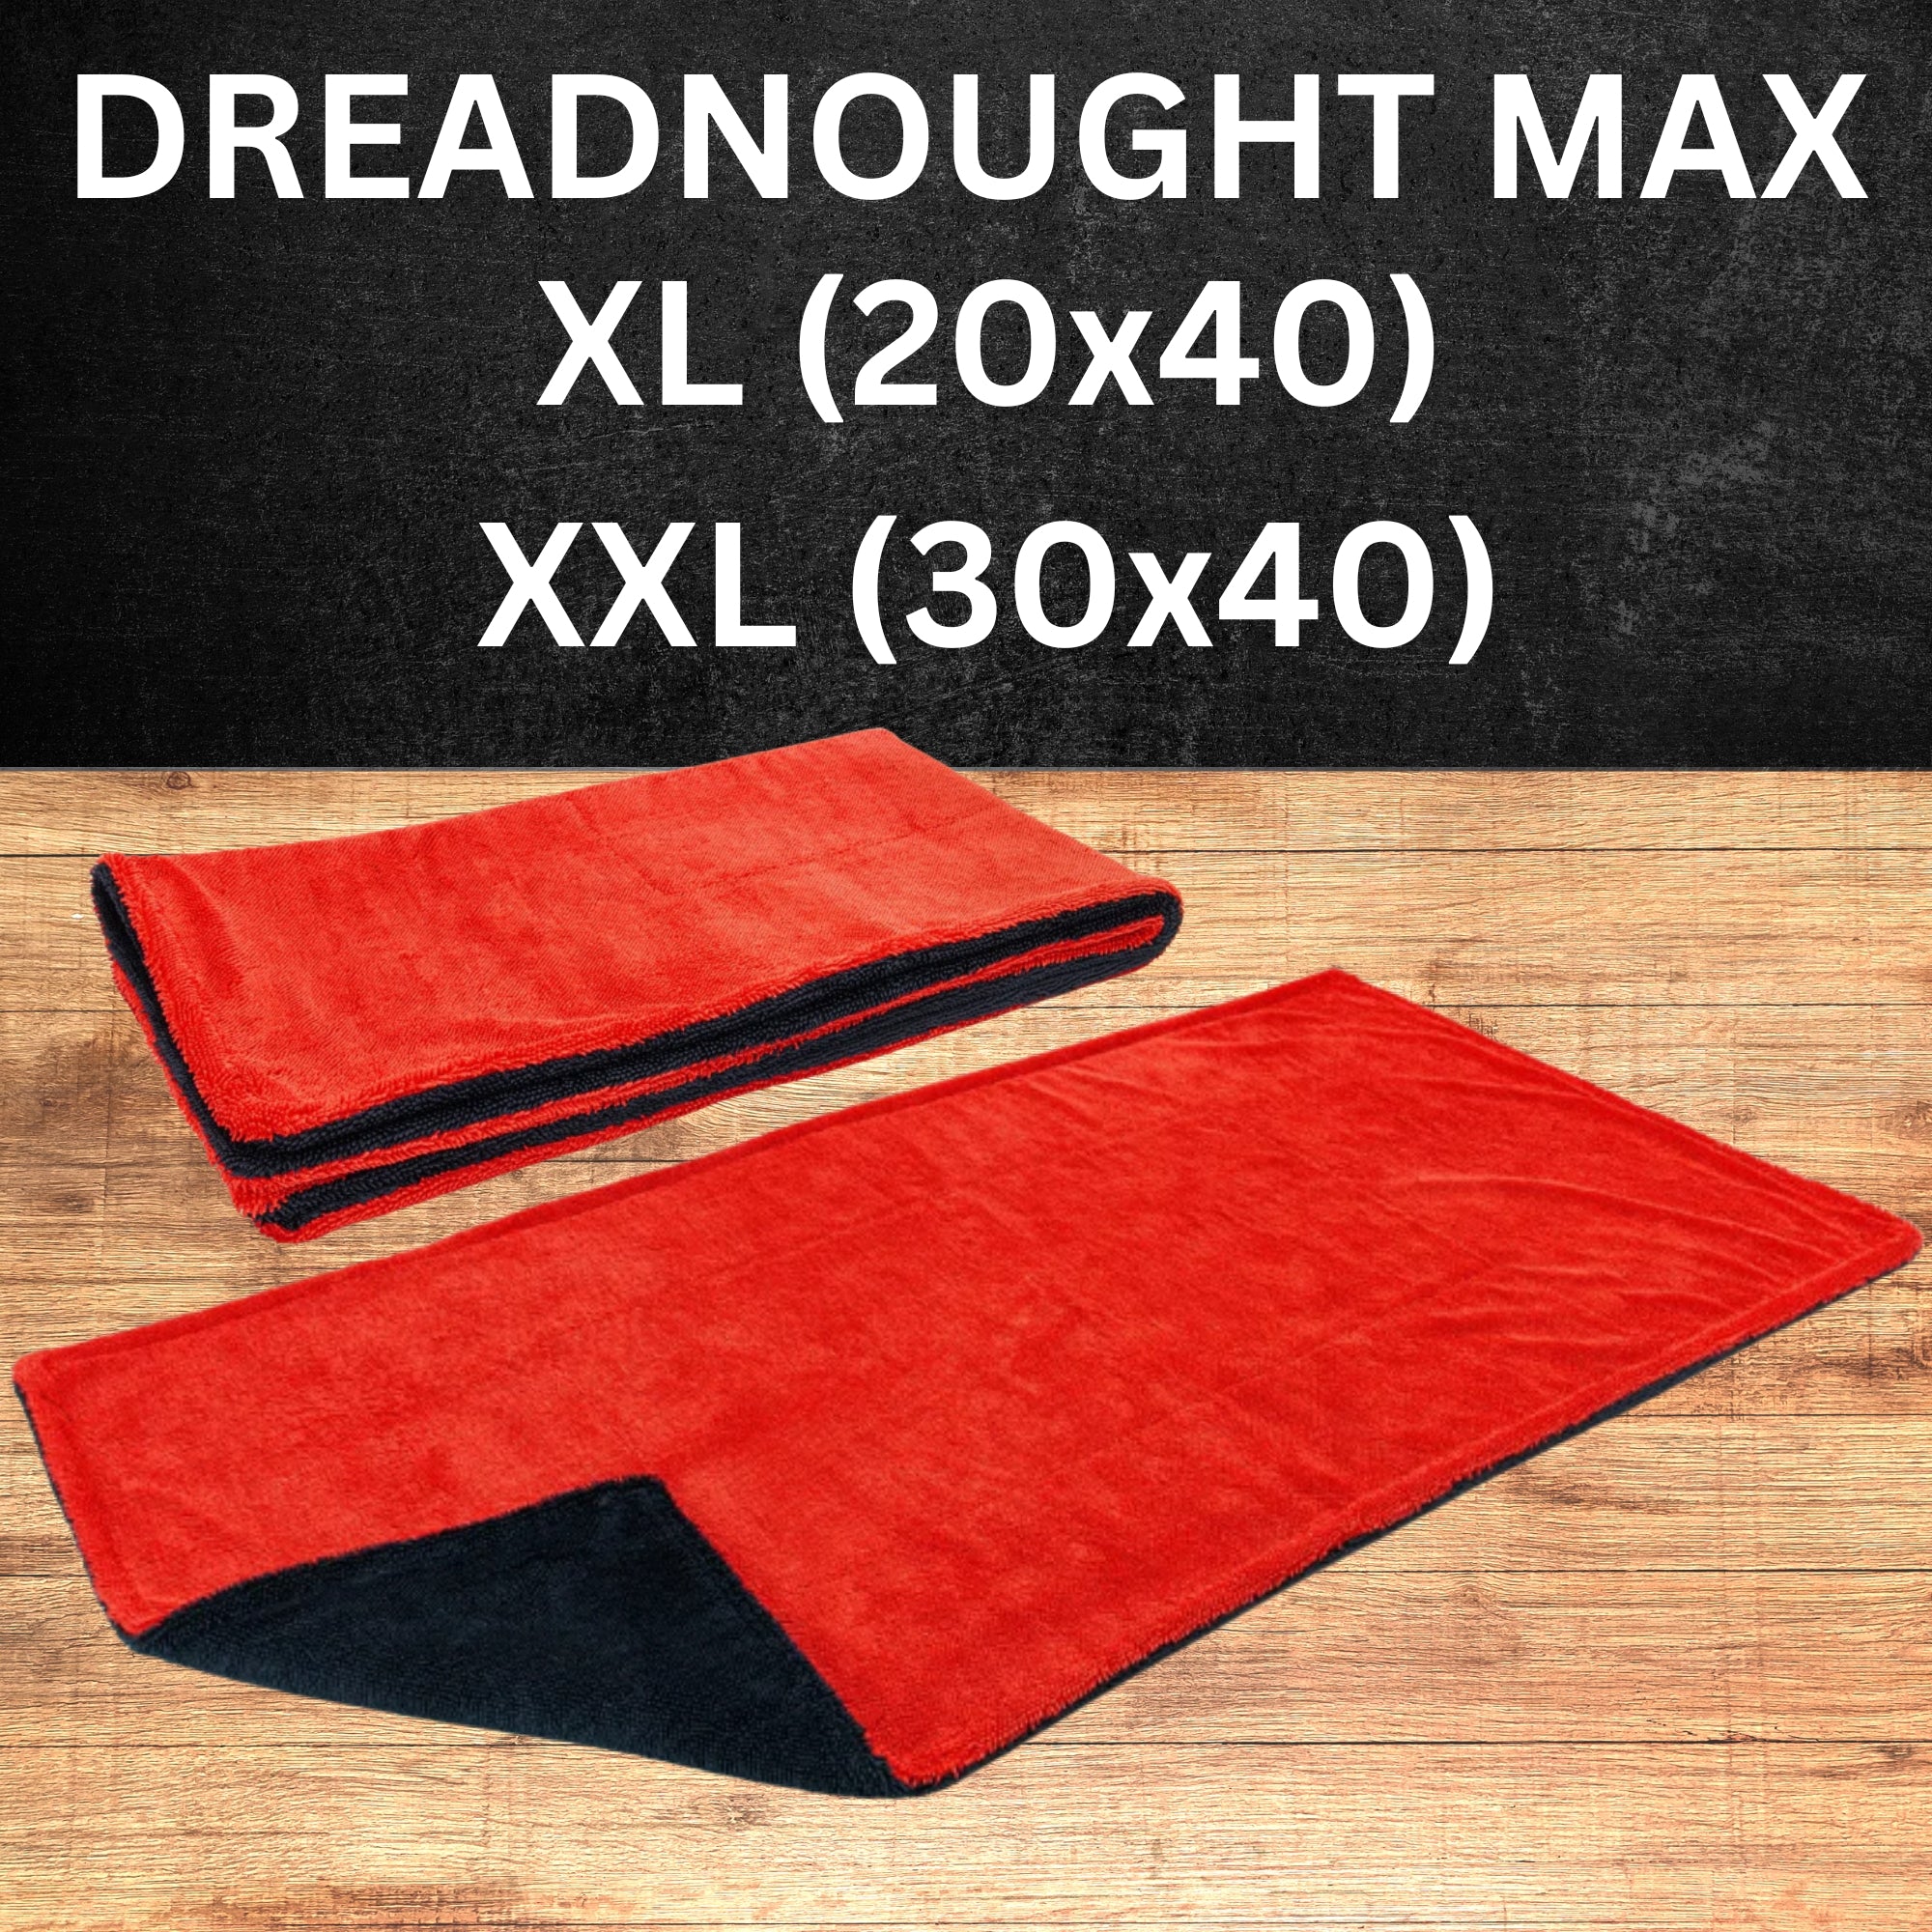 Autofiber Dreadnought Jr. Red and Gray 2 Pack